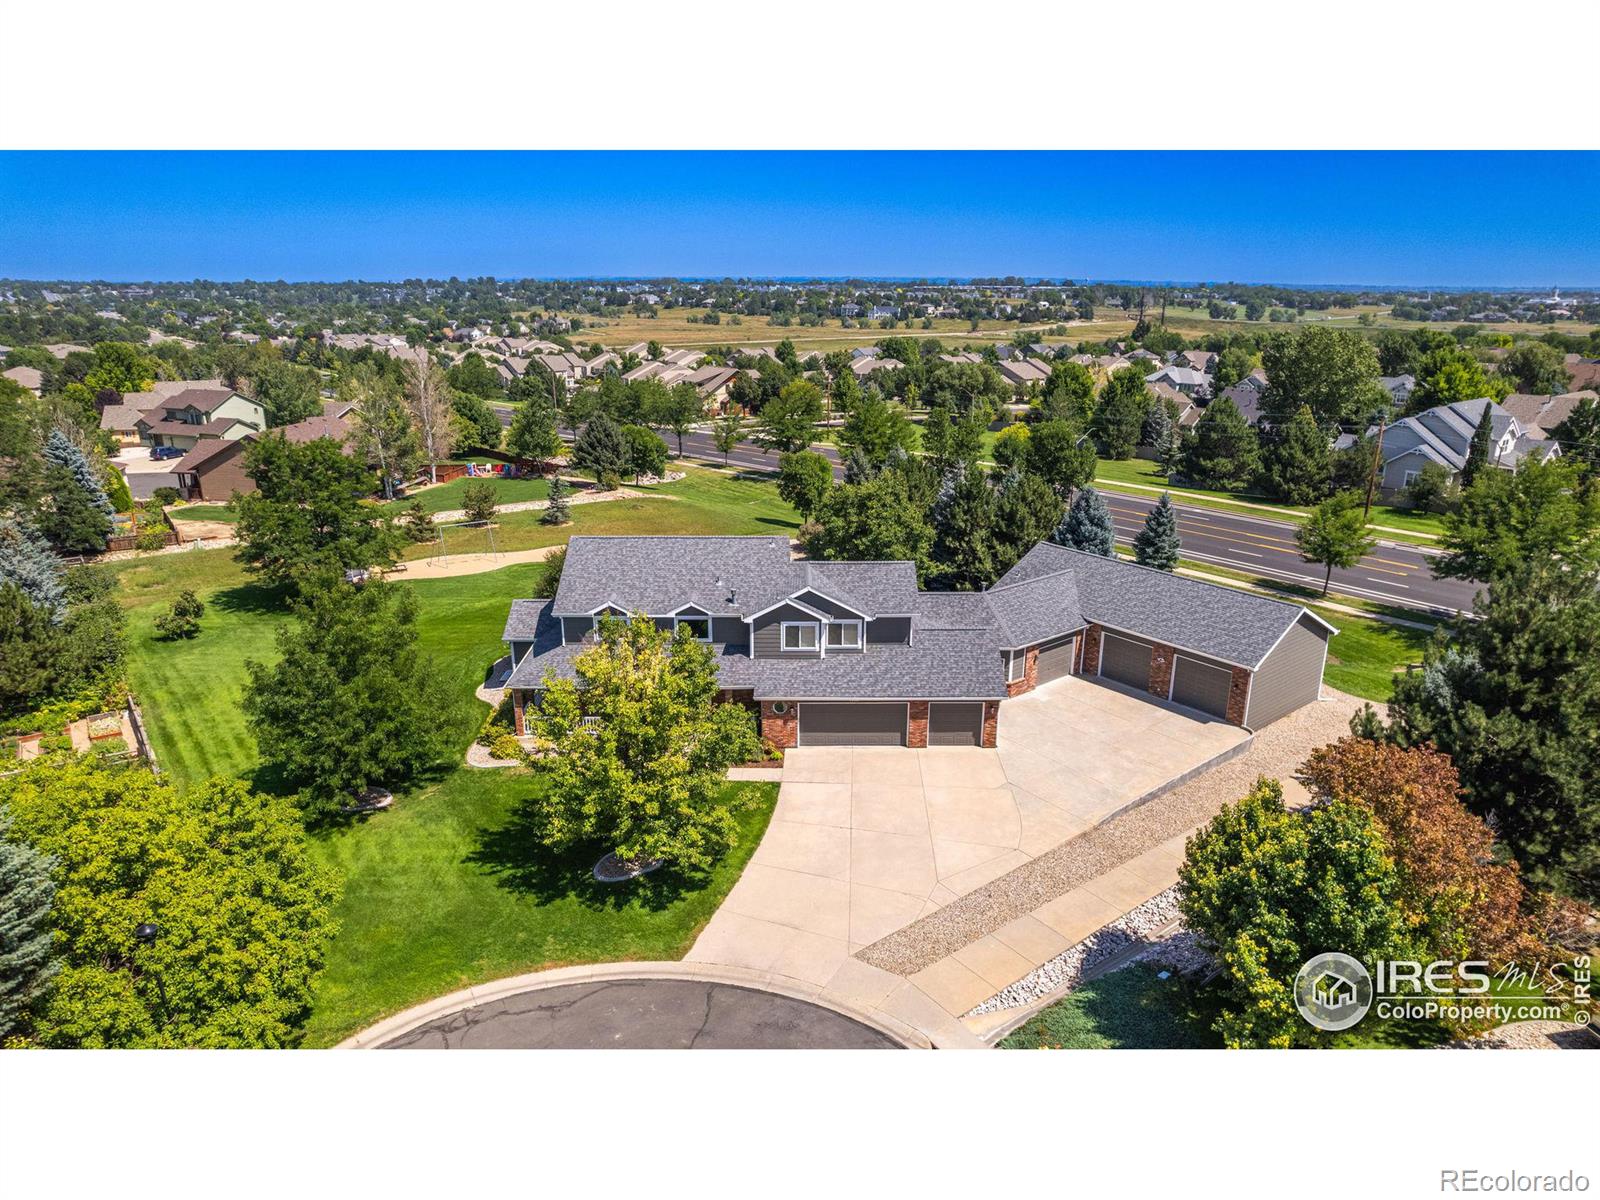 1006  Somerly Lane, fort collins MLS: 4567891002864 Beds: 4 Baths: 5 Price: $1,095,000